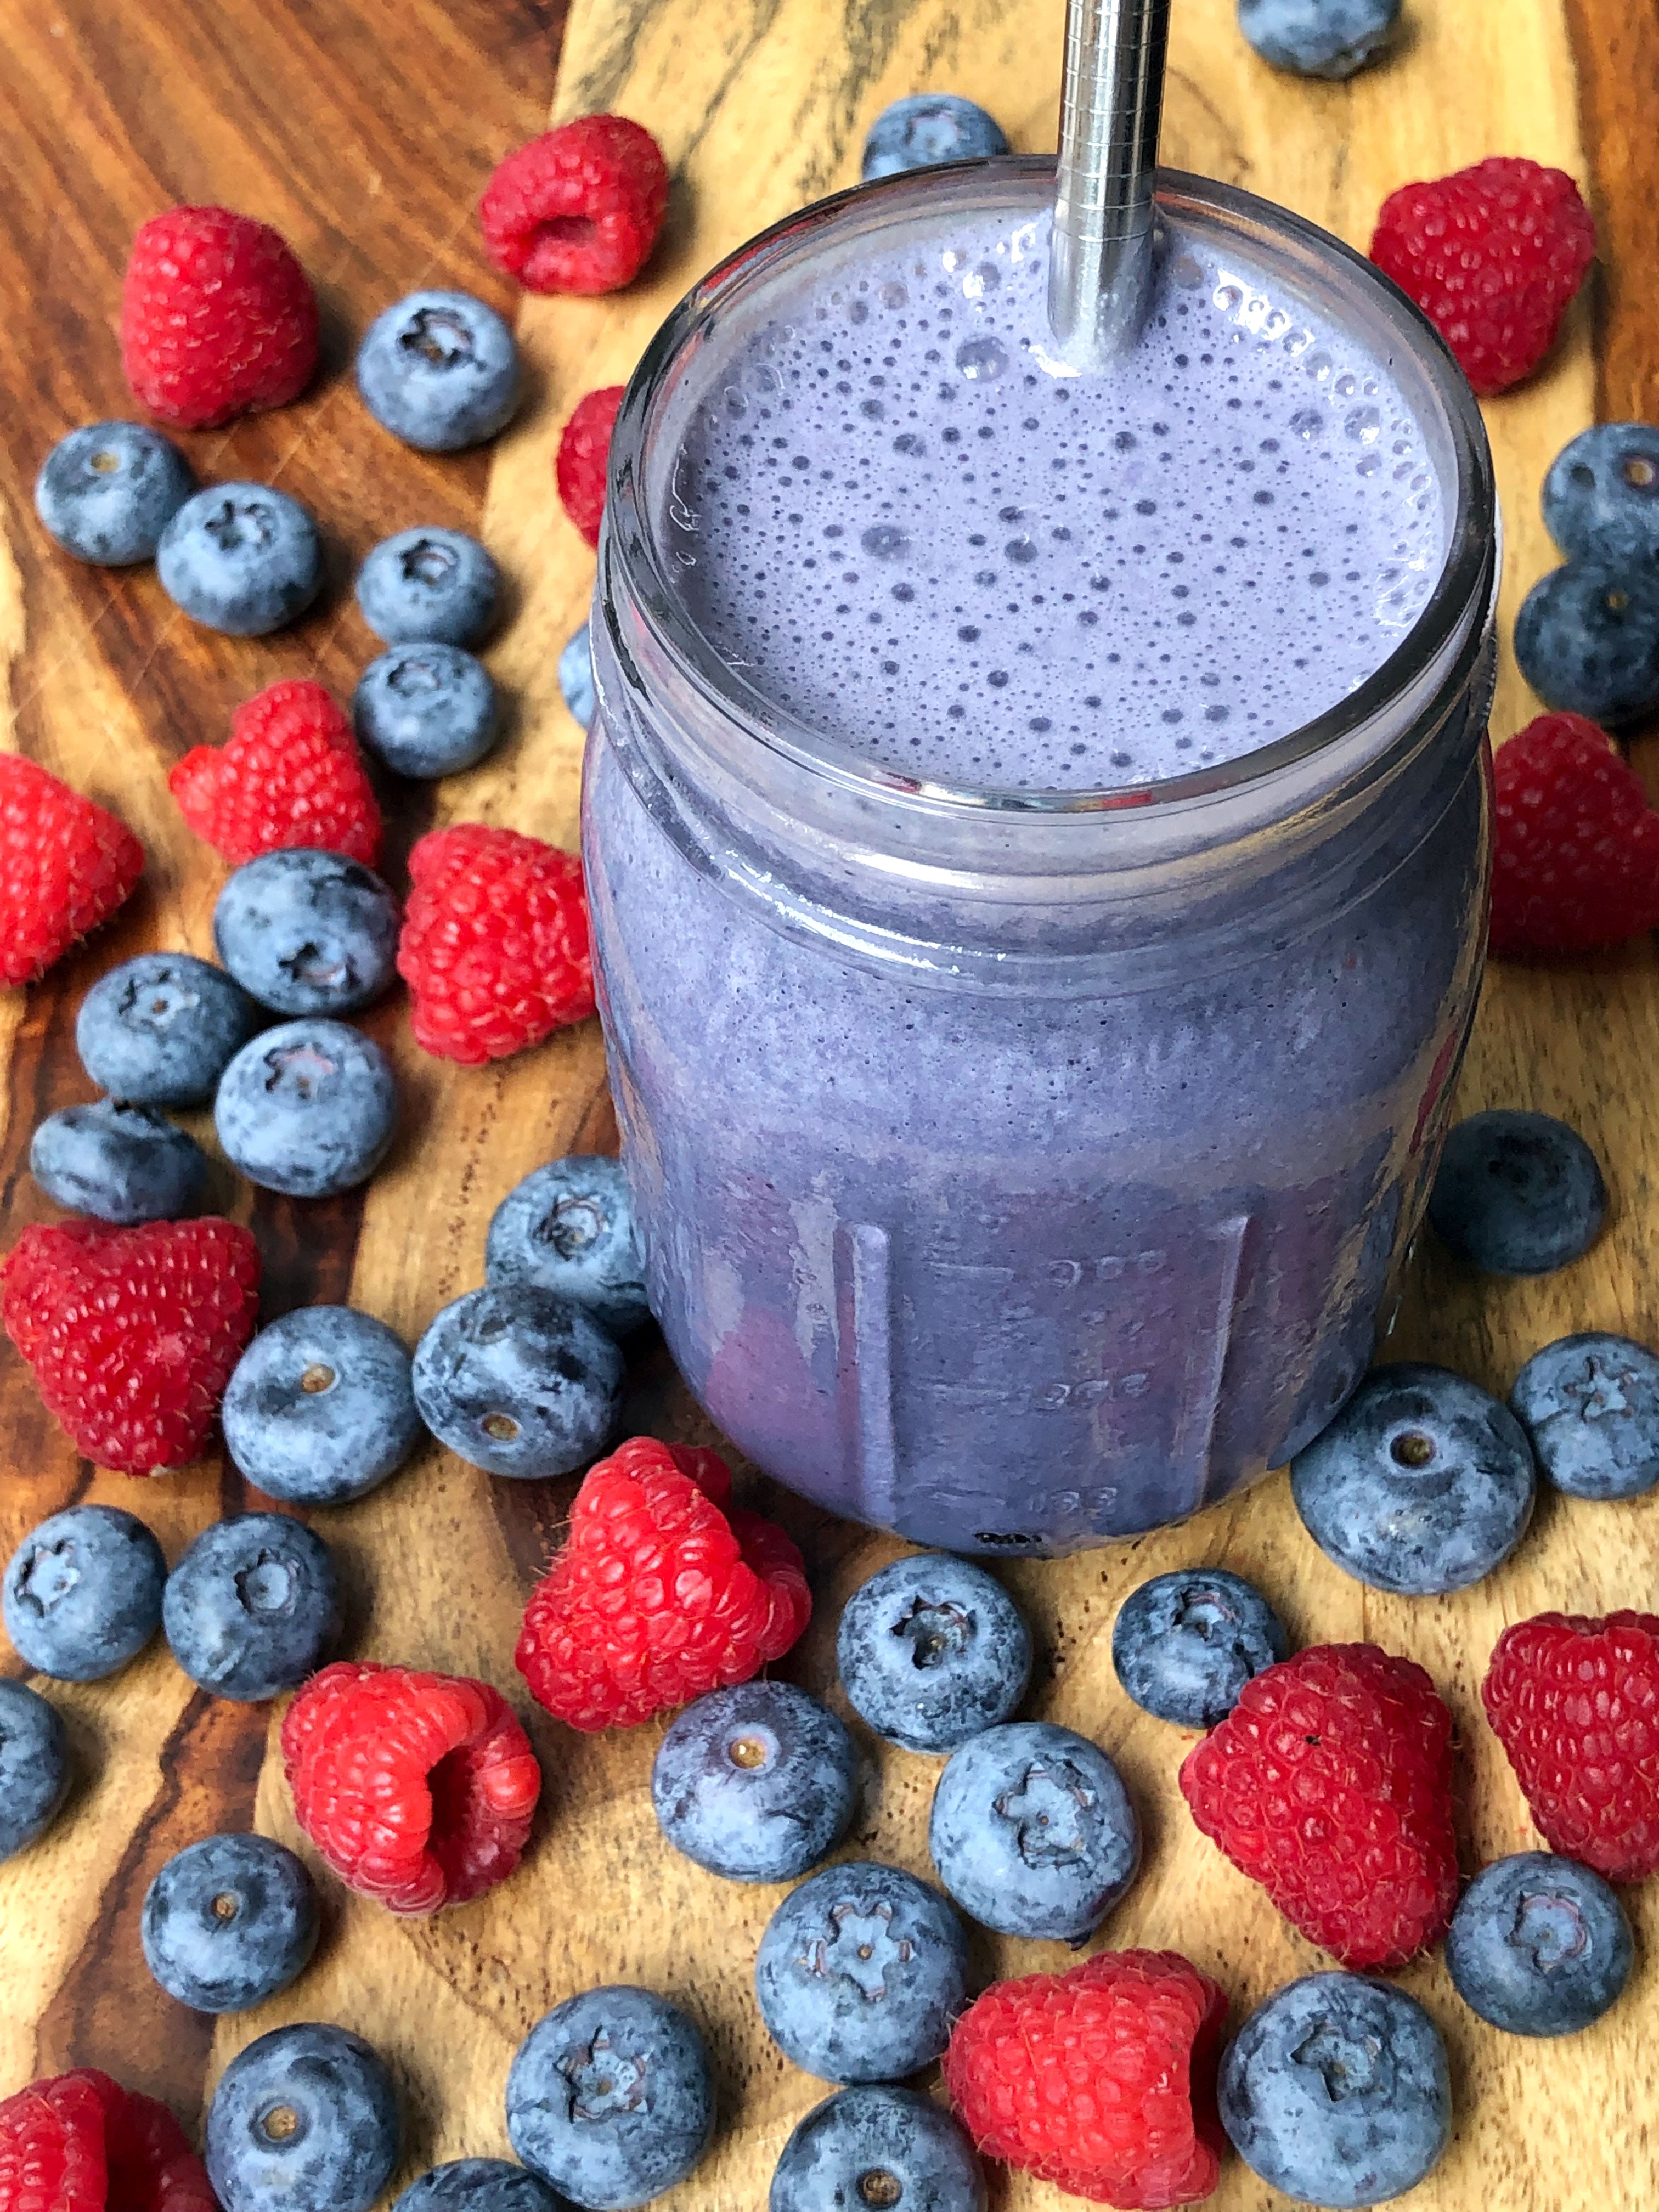 Kill Belly Fat trying to make this amazing smoothie with only 2